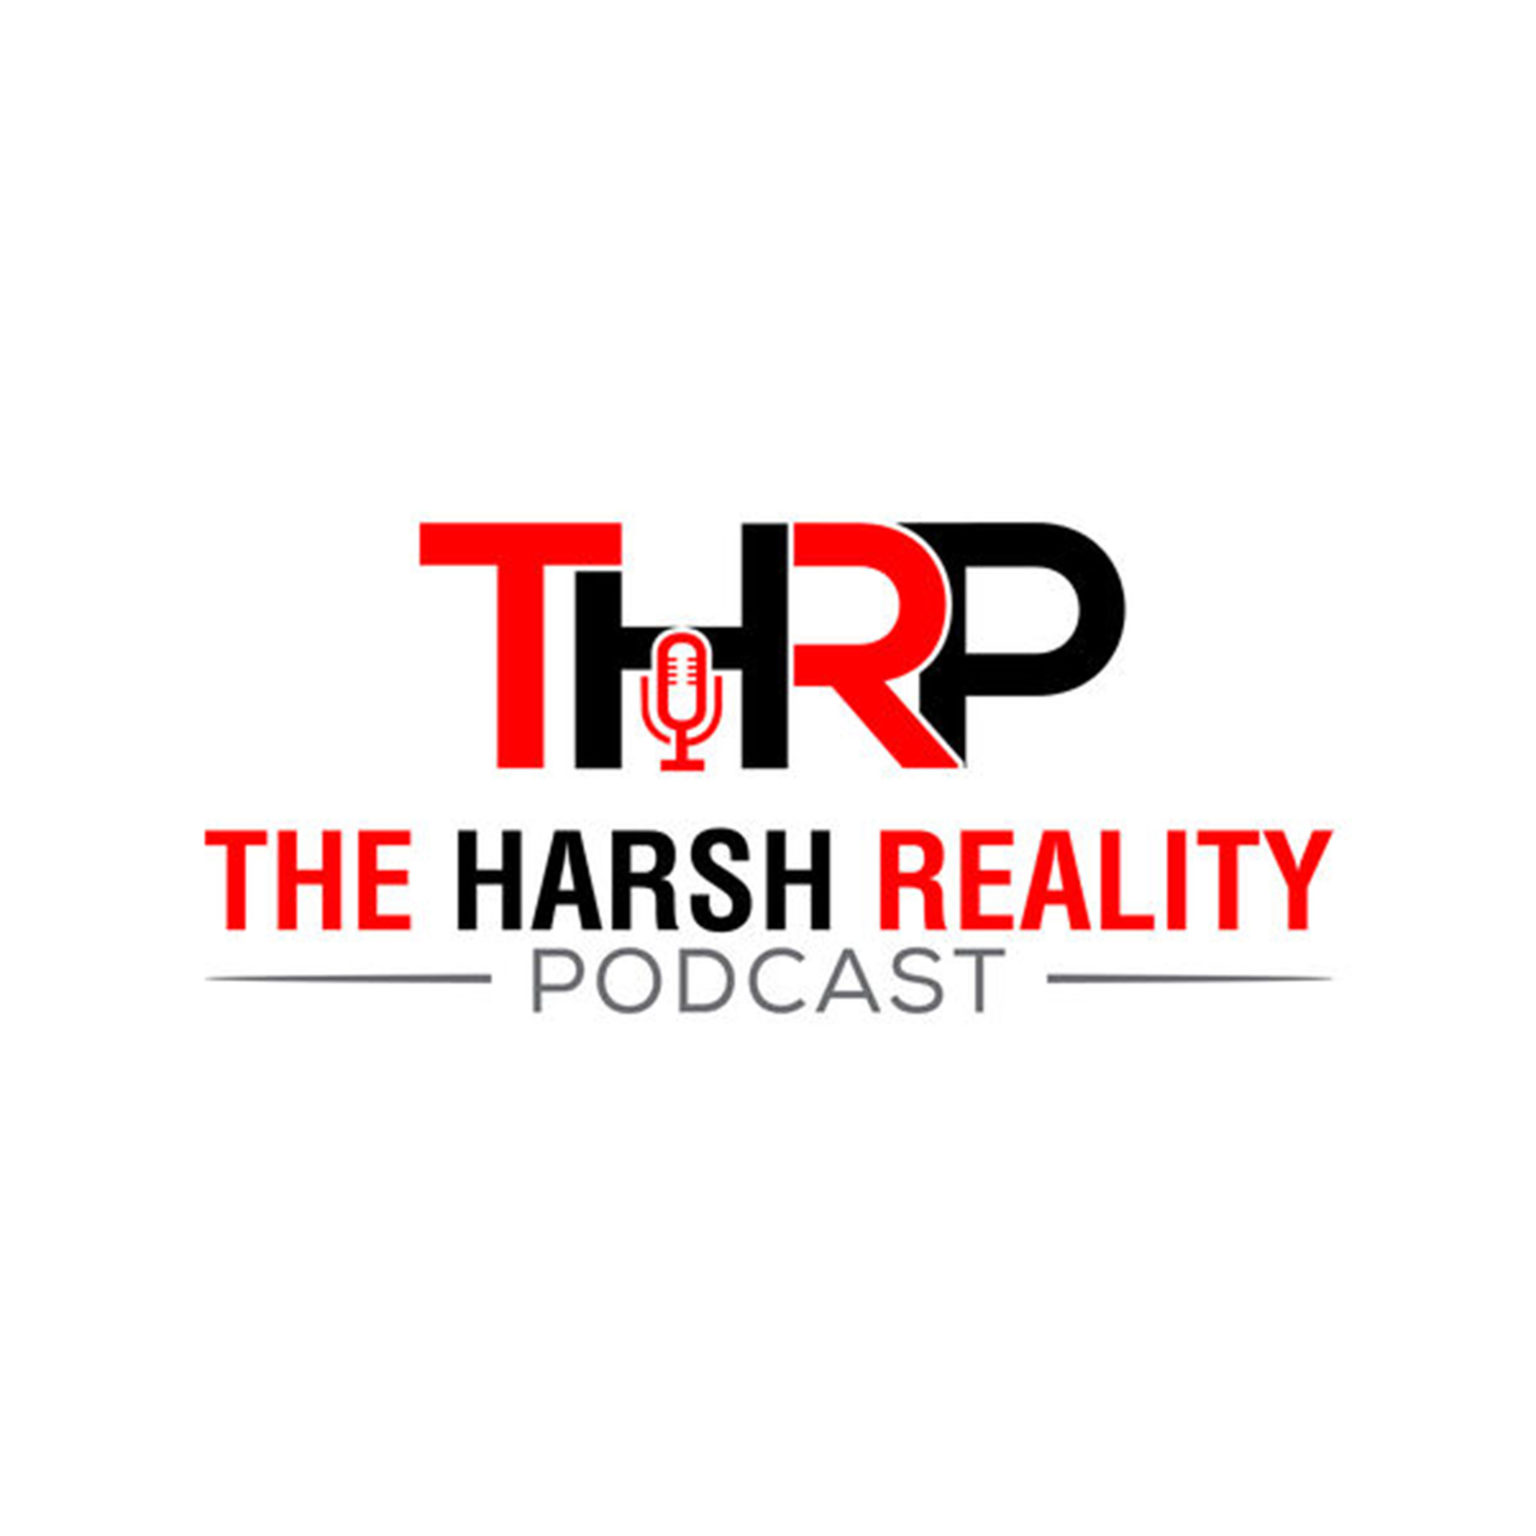 The Harsh Reality Podcast